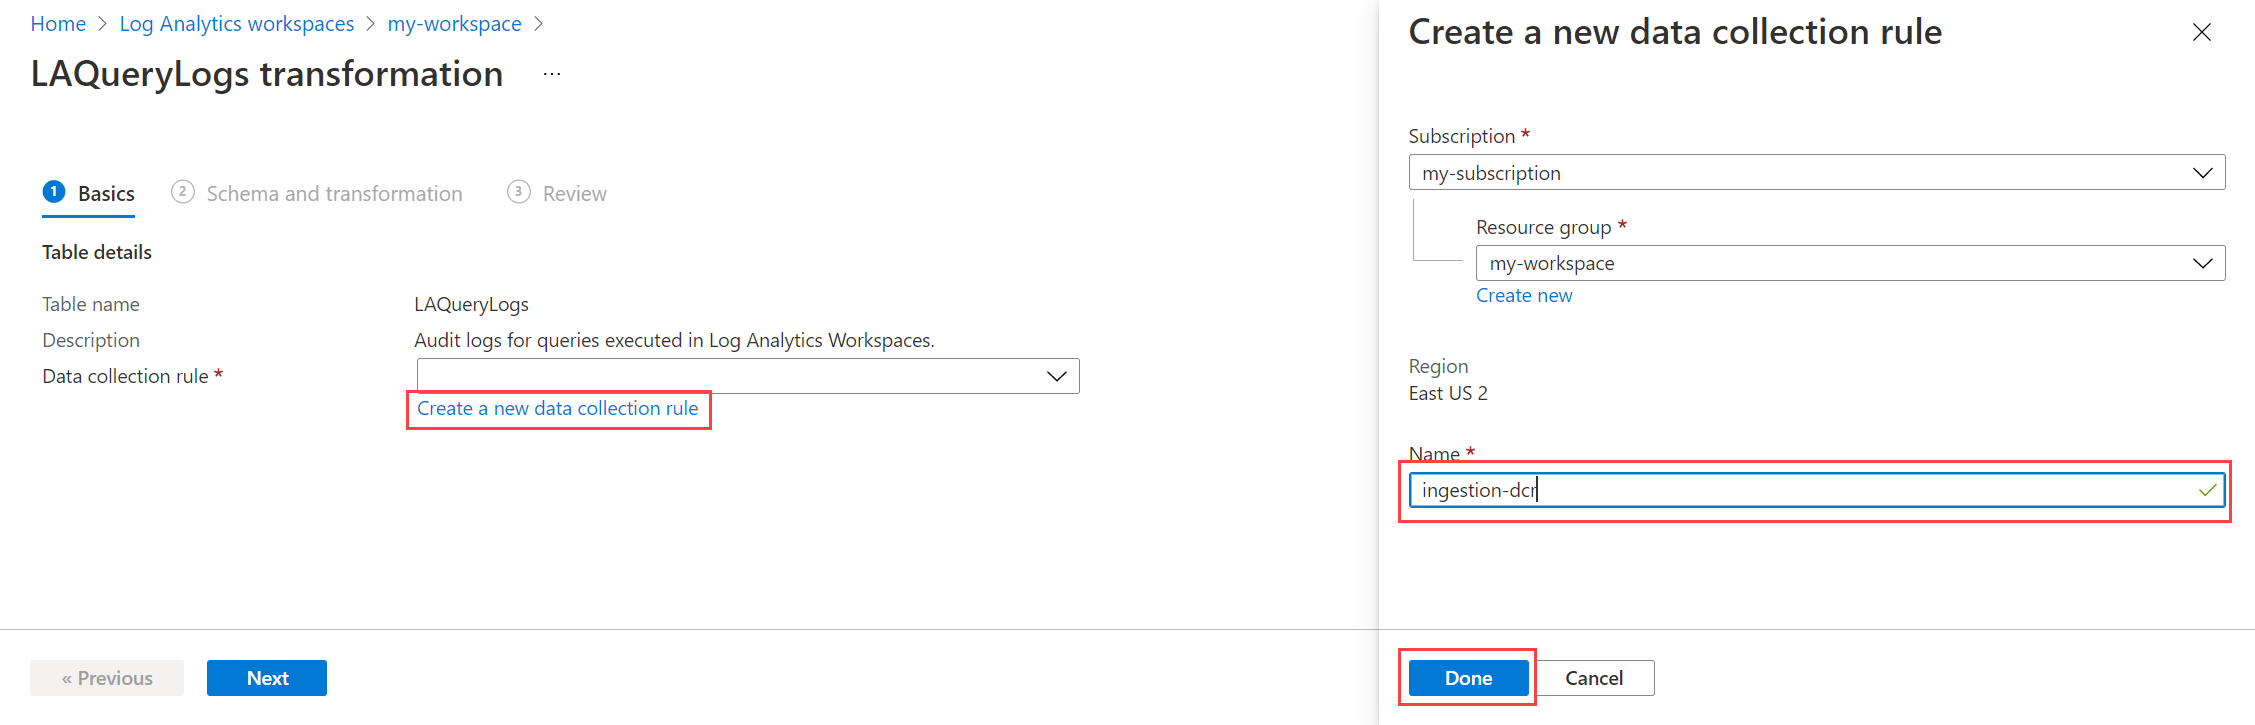 Screenshot that shows creating a new data collection rule.